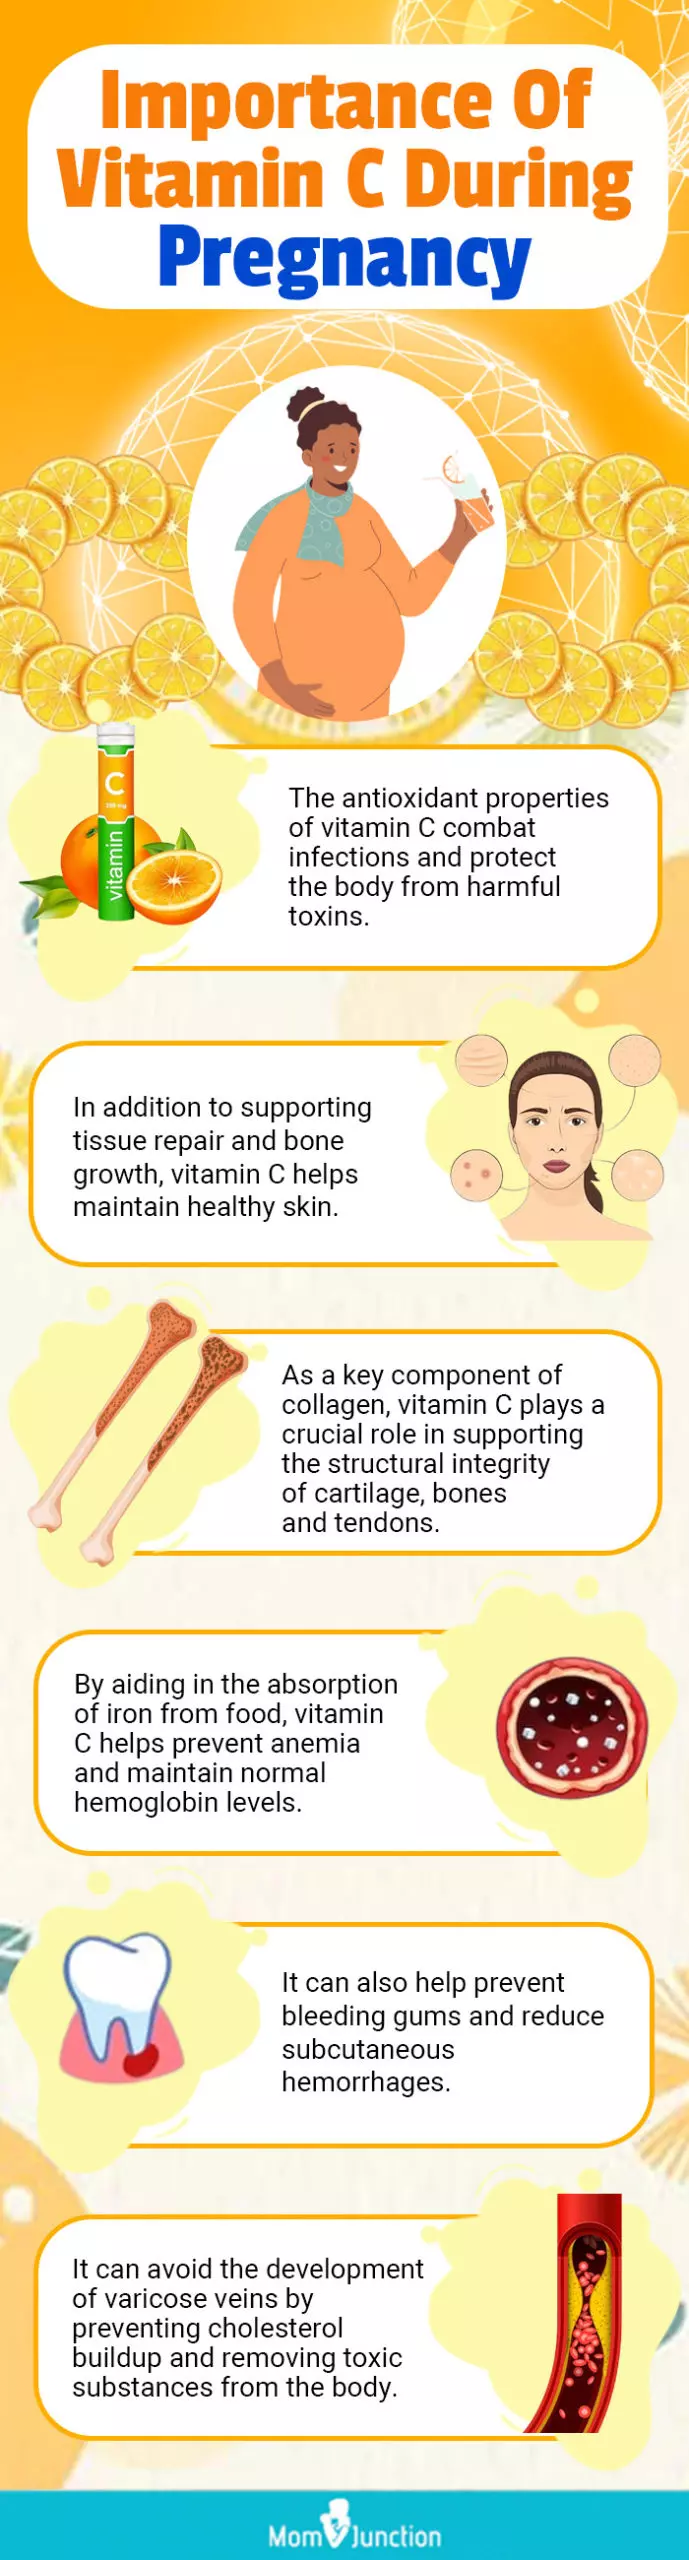 importance of vitamin c during pregancy (infographic)